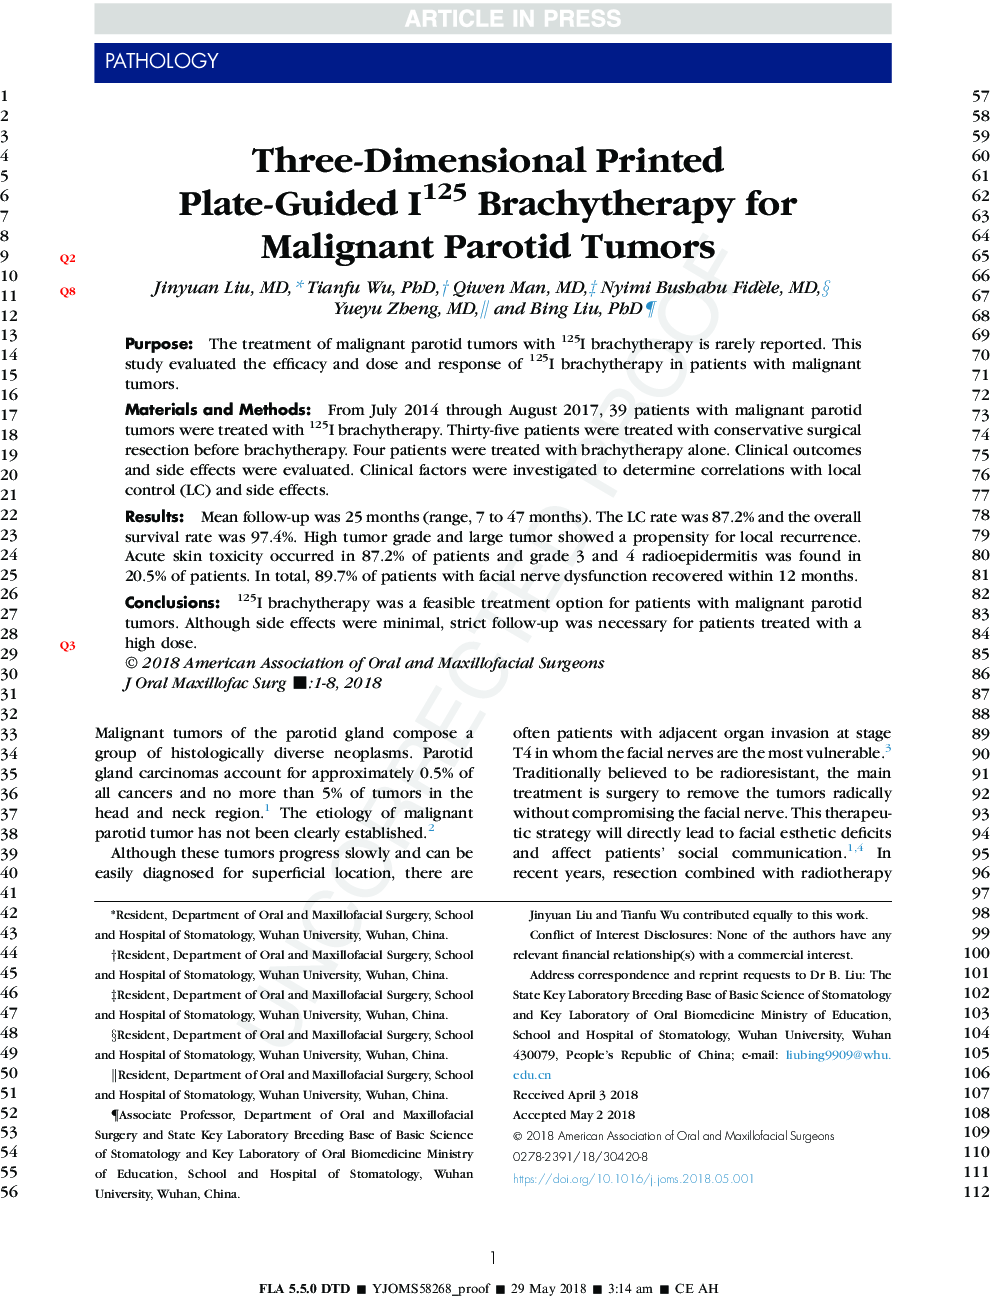 Three-Dimensional Printed Plate-Guided 125I Brachytherapy for Malignant Parotid Tumors